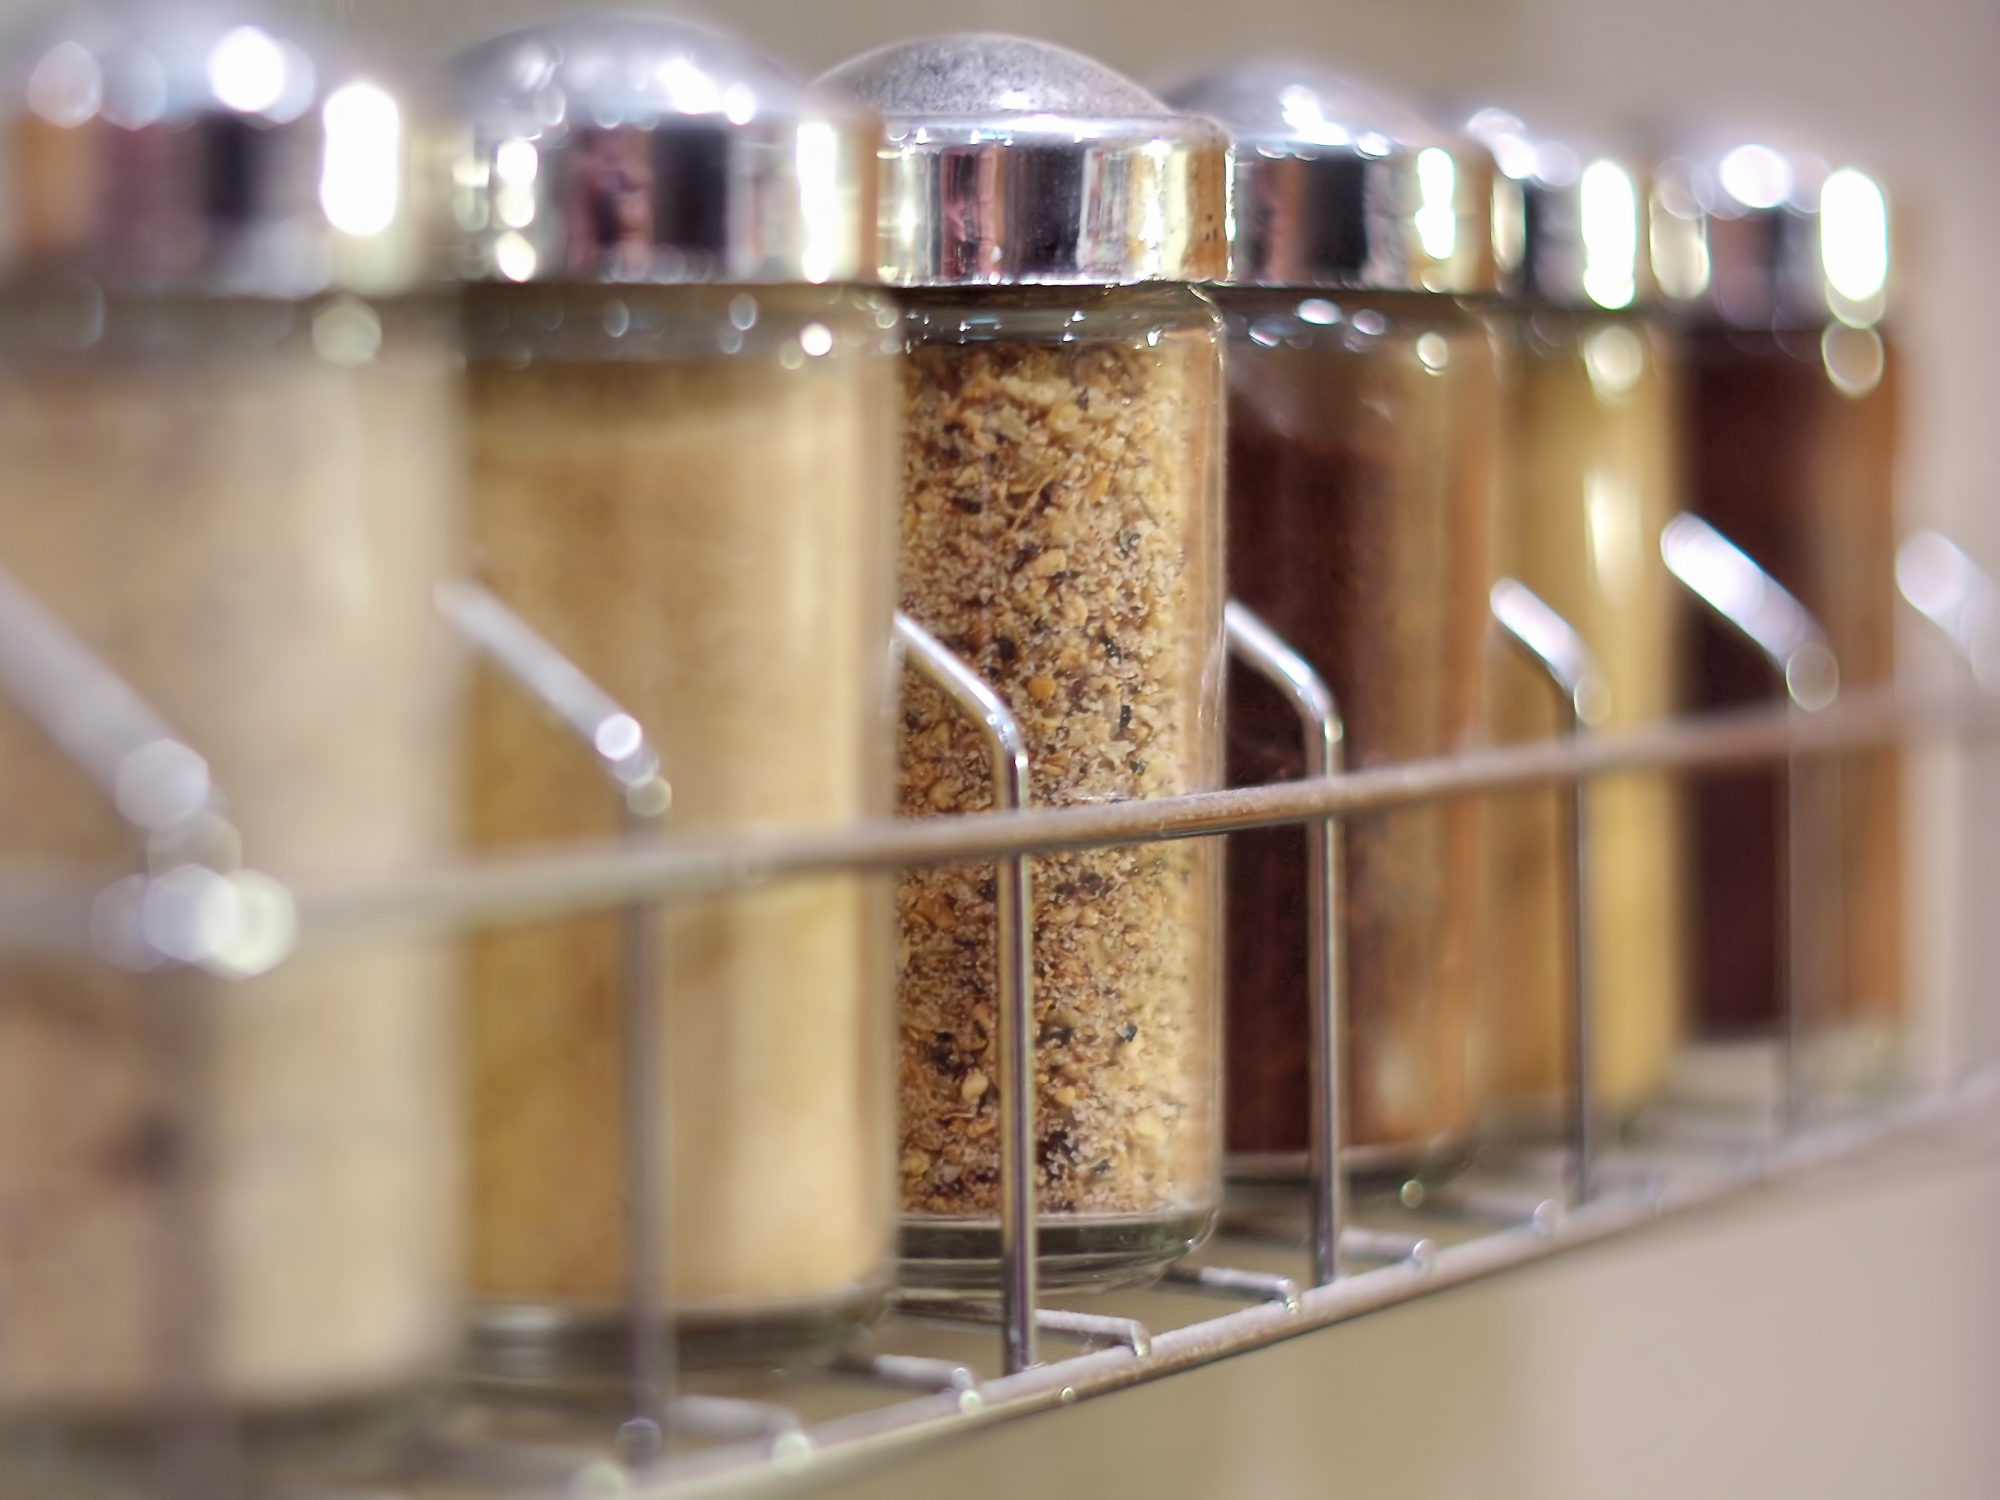 18+ ways your spice rack is a medicine cabinet